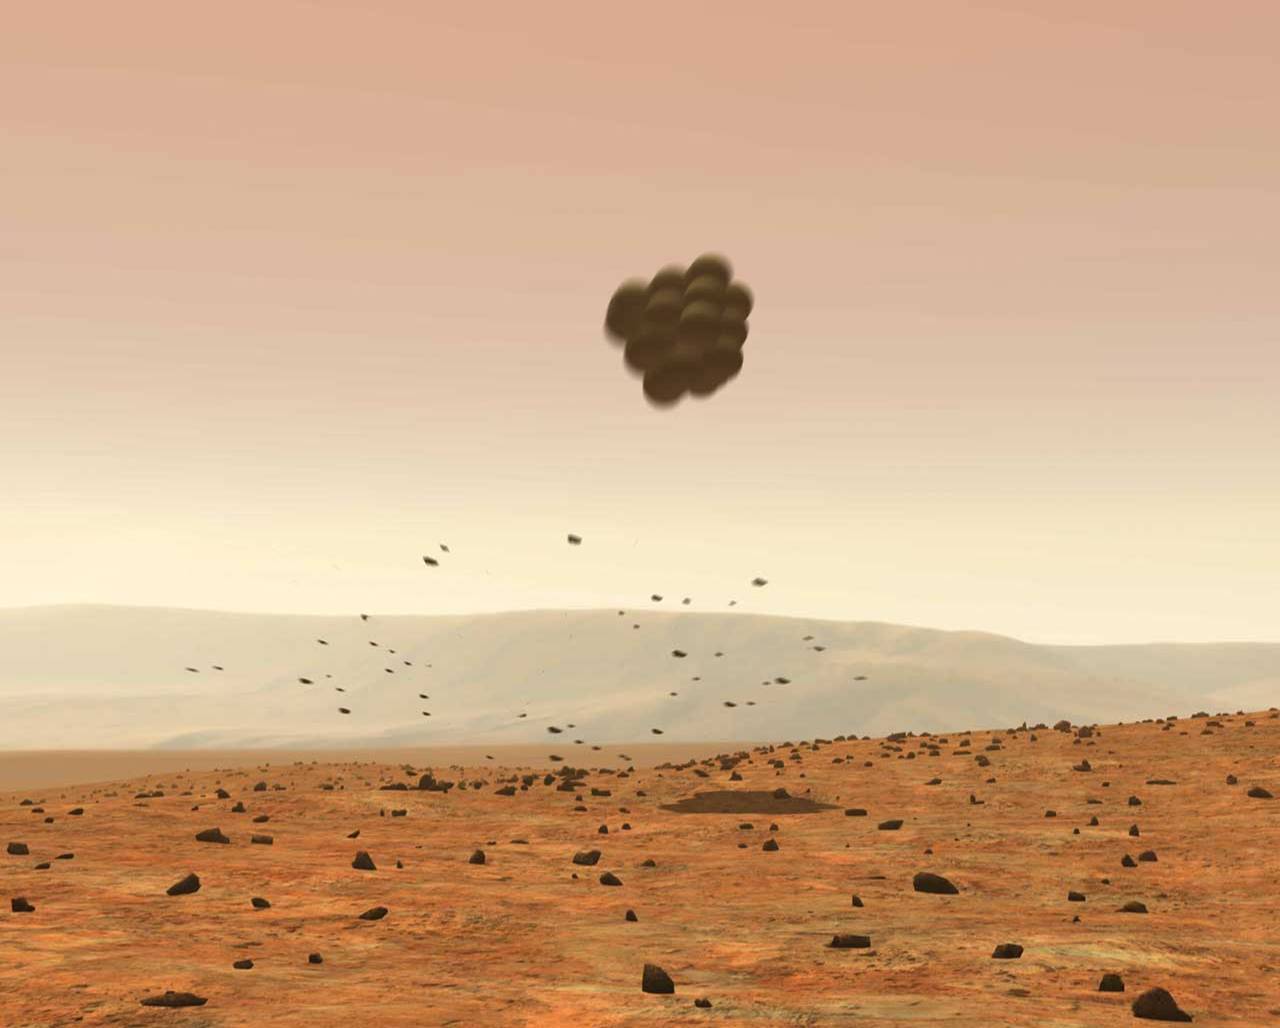 Protected by large airbags, the lander falls away from the parachute, landing safely on Mars.